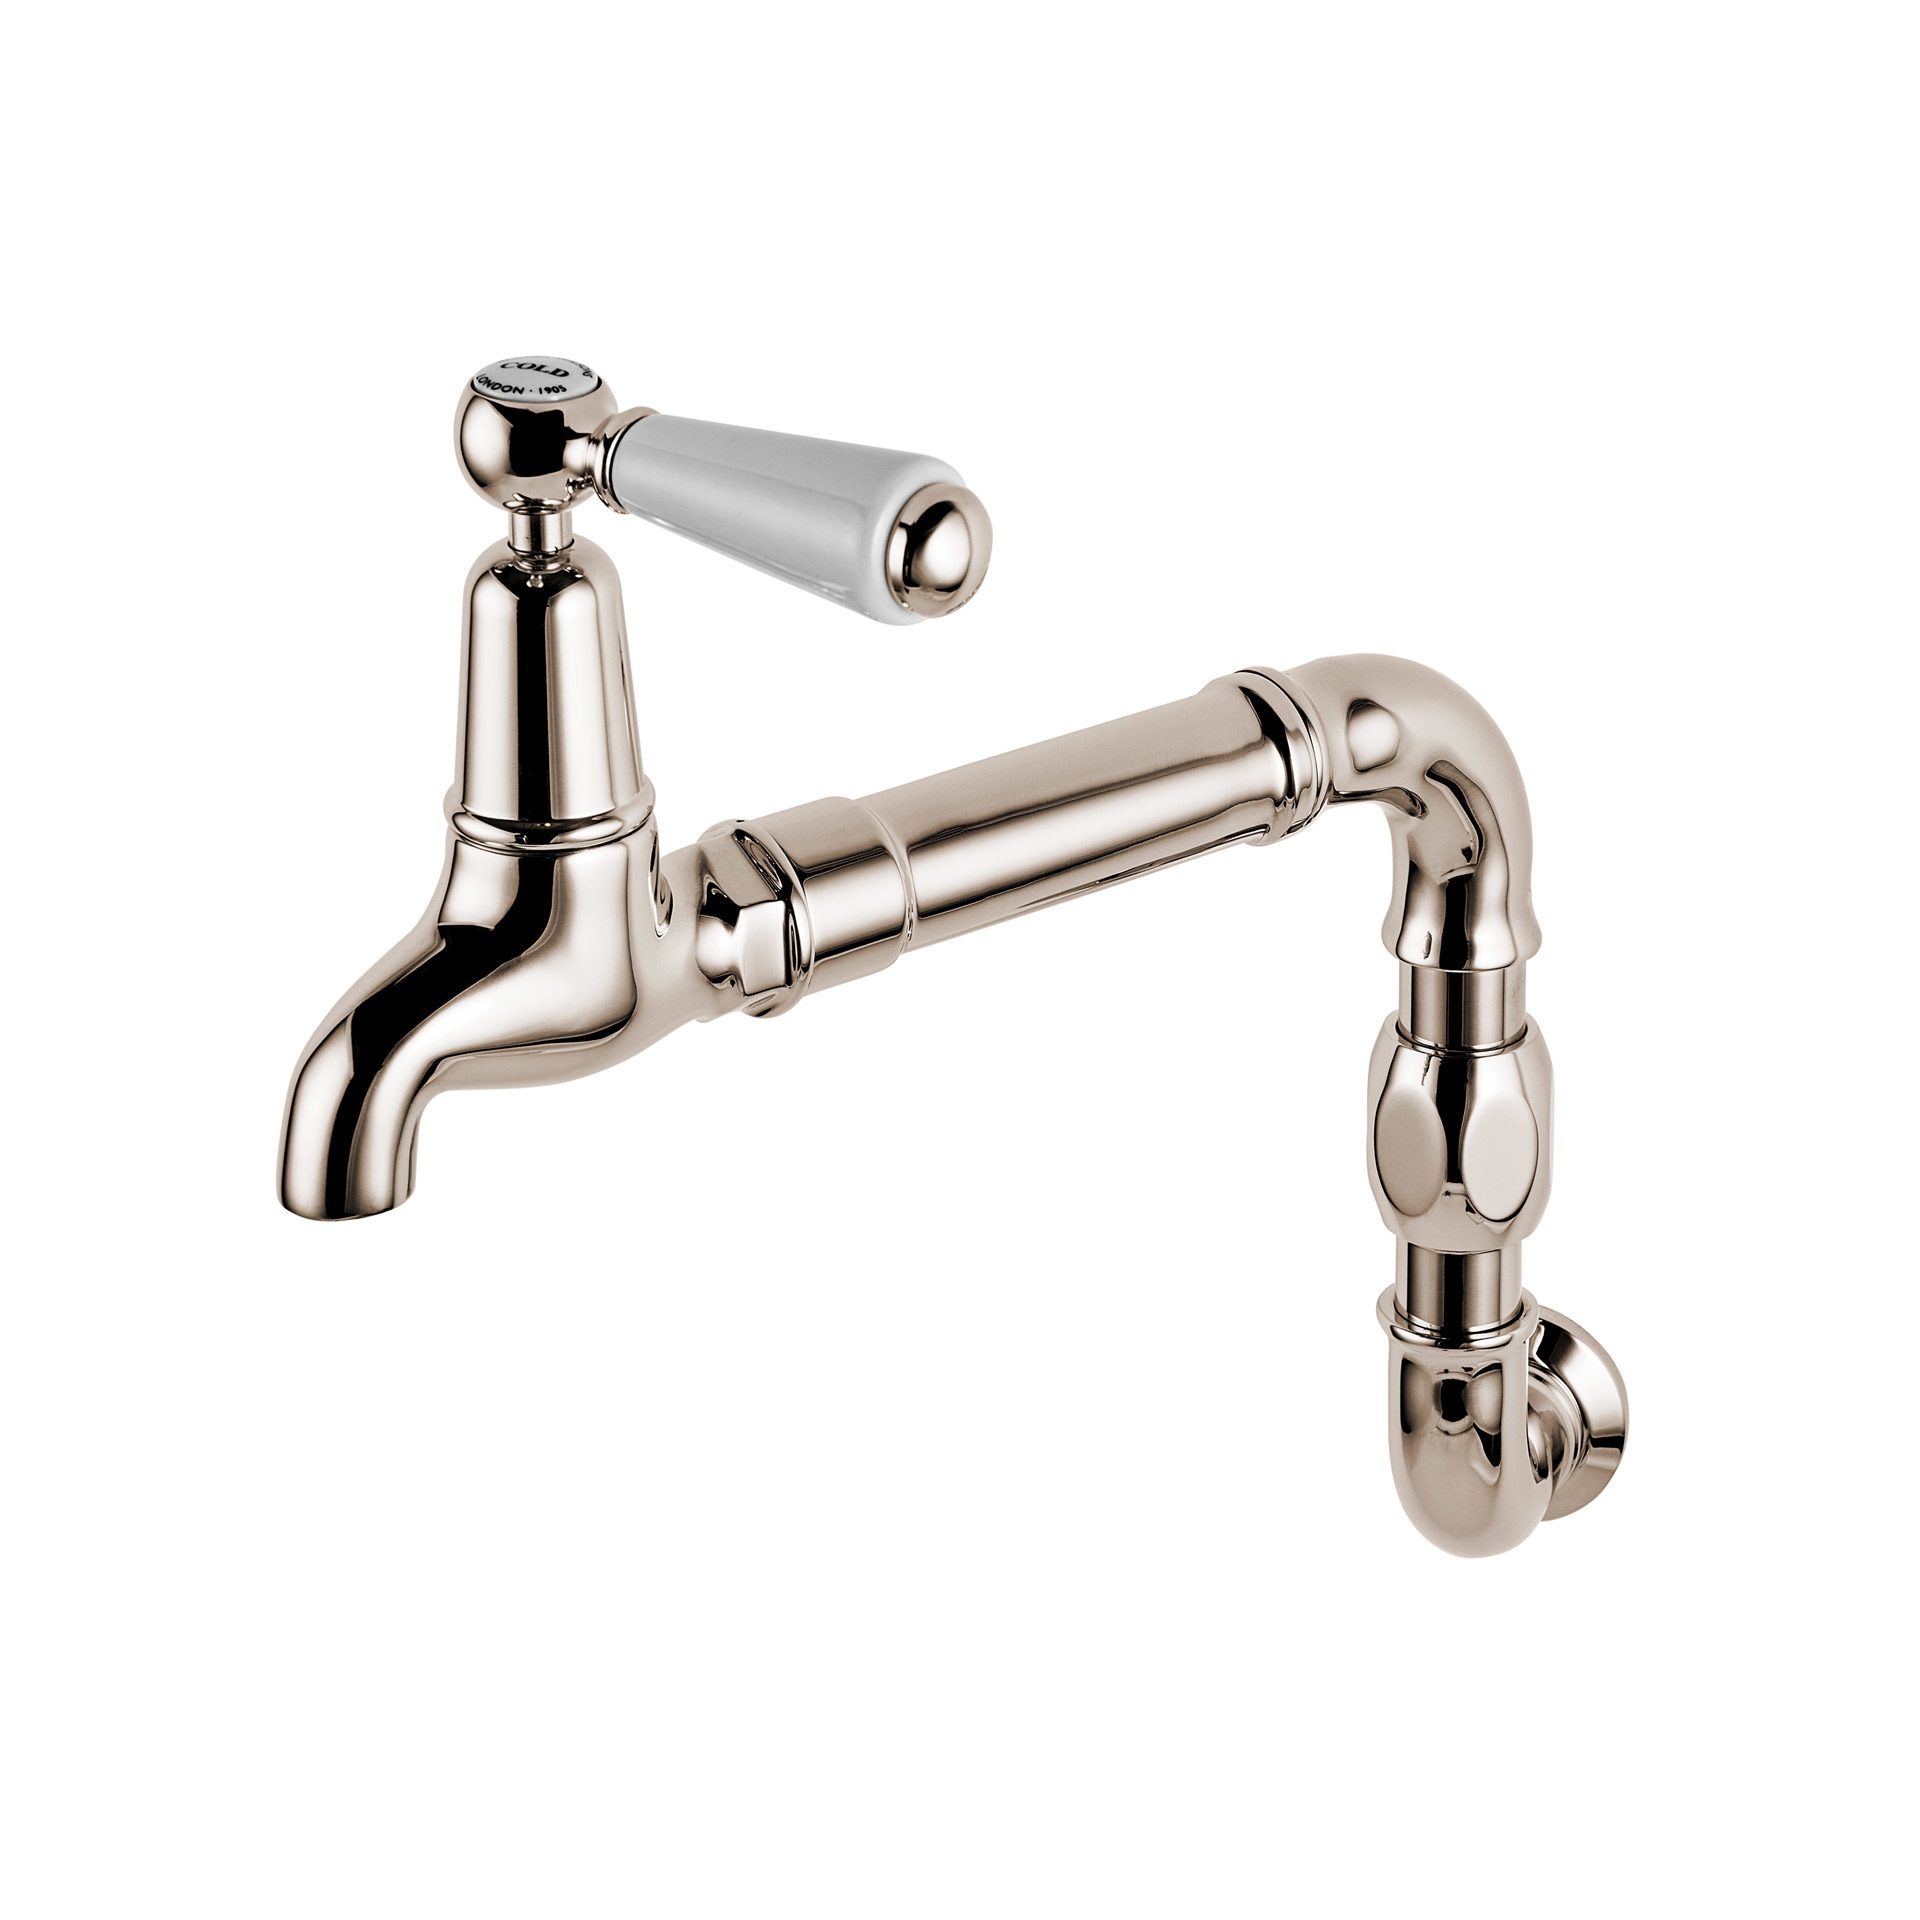 Wall mounted kitchen tap with china white lever and swinging arm